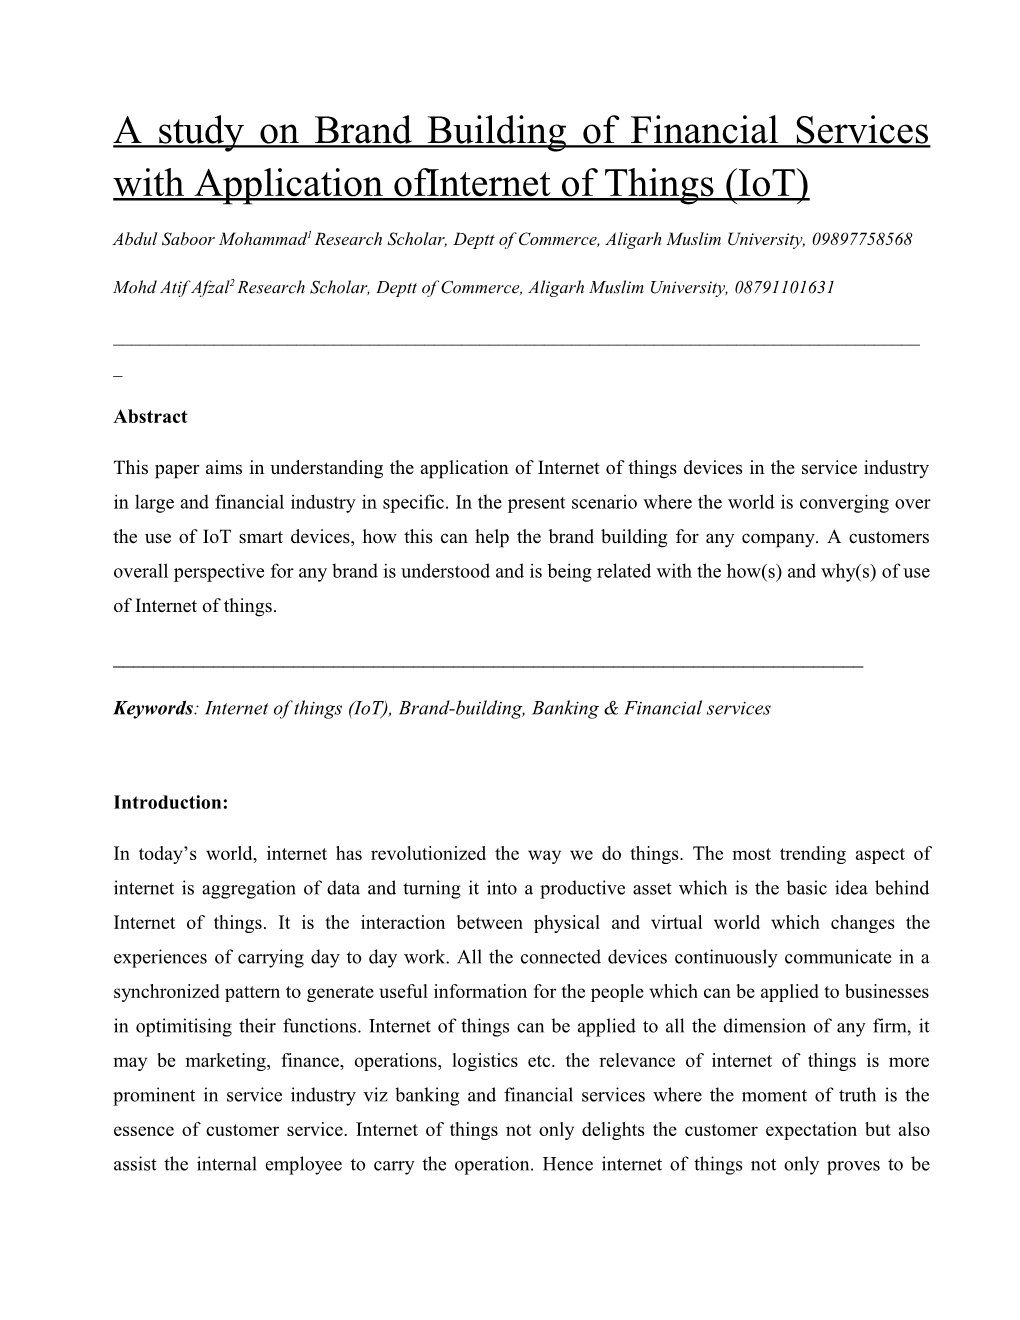 A Study on Brand Building of Financial Services with Application Ofinternetof Things (Iot)